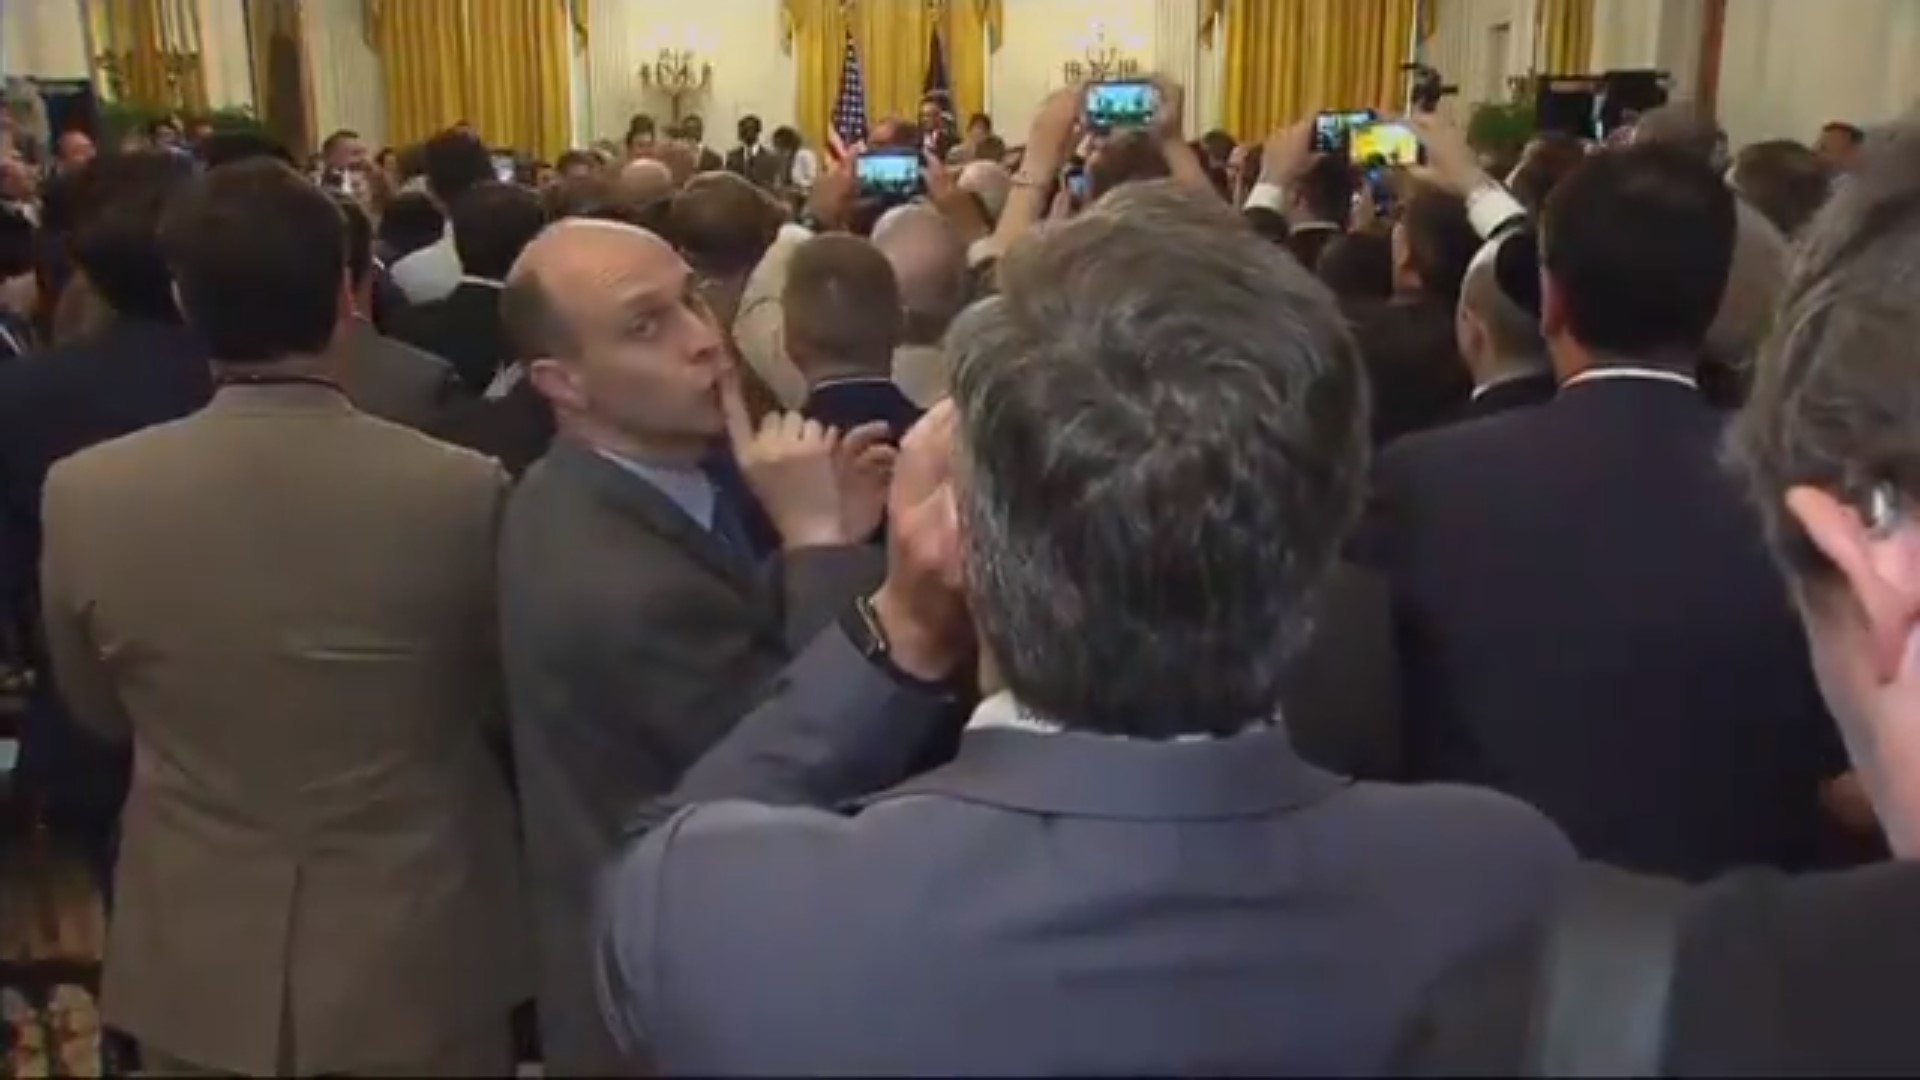 WATCH: Some Dude Shushes Jim Acosta As He Shouts ‘Will You Stop Calling Press The Enemy’ To Trump